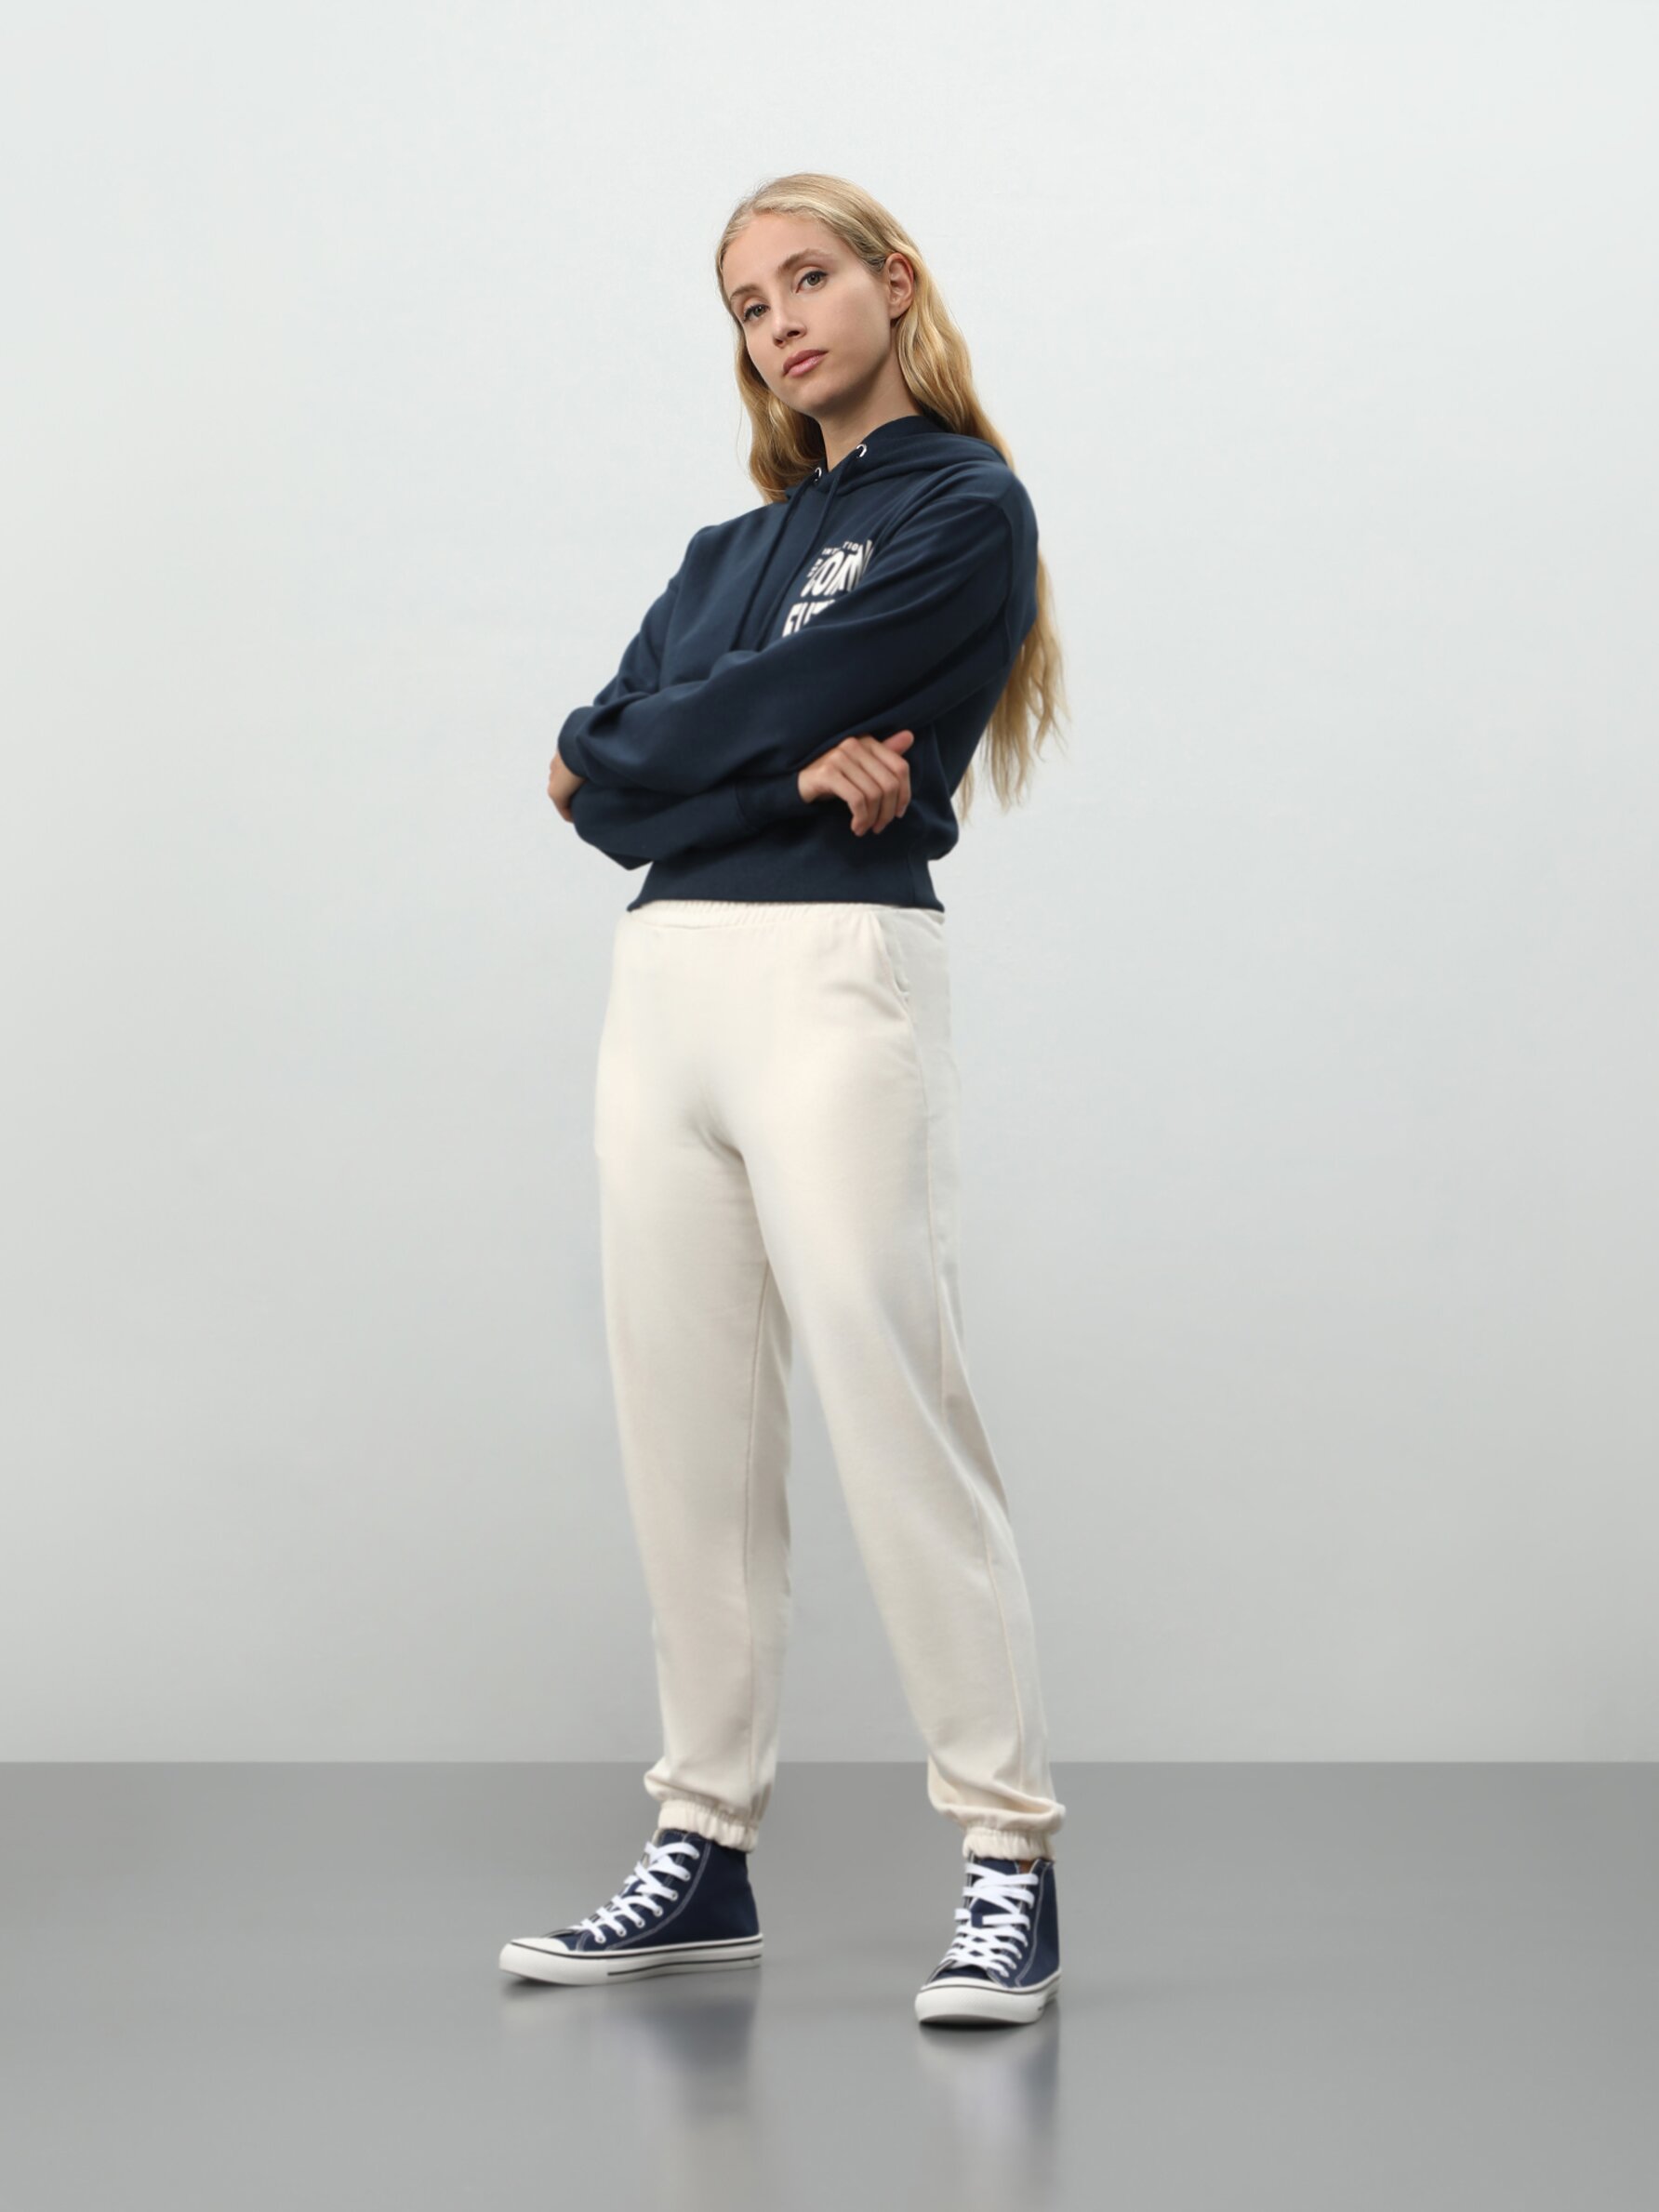 discount 69% Black S WOMEN FASHION Trousers Basic Lefties tracksuit and joggers 